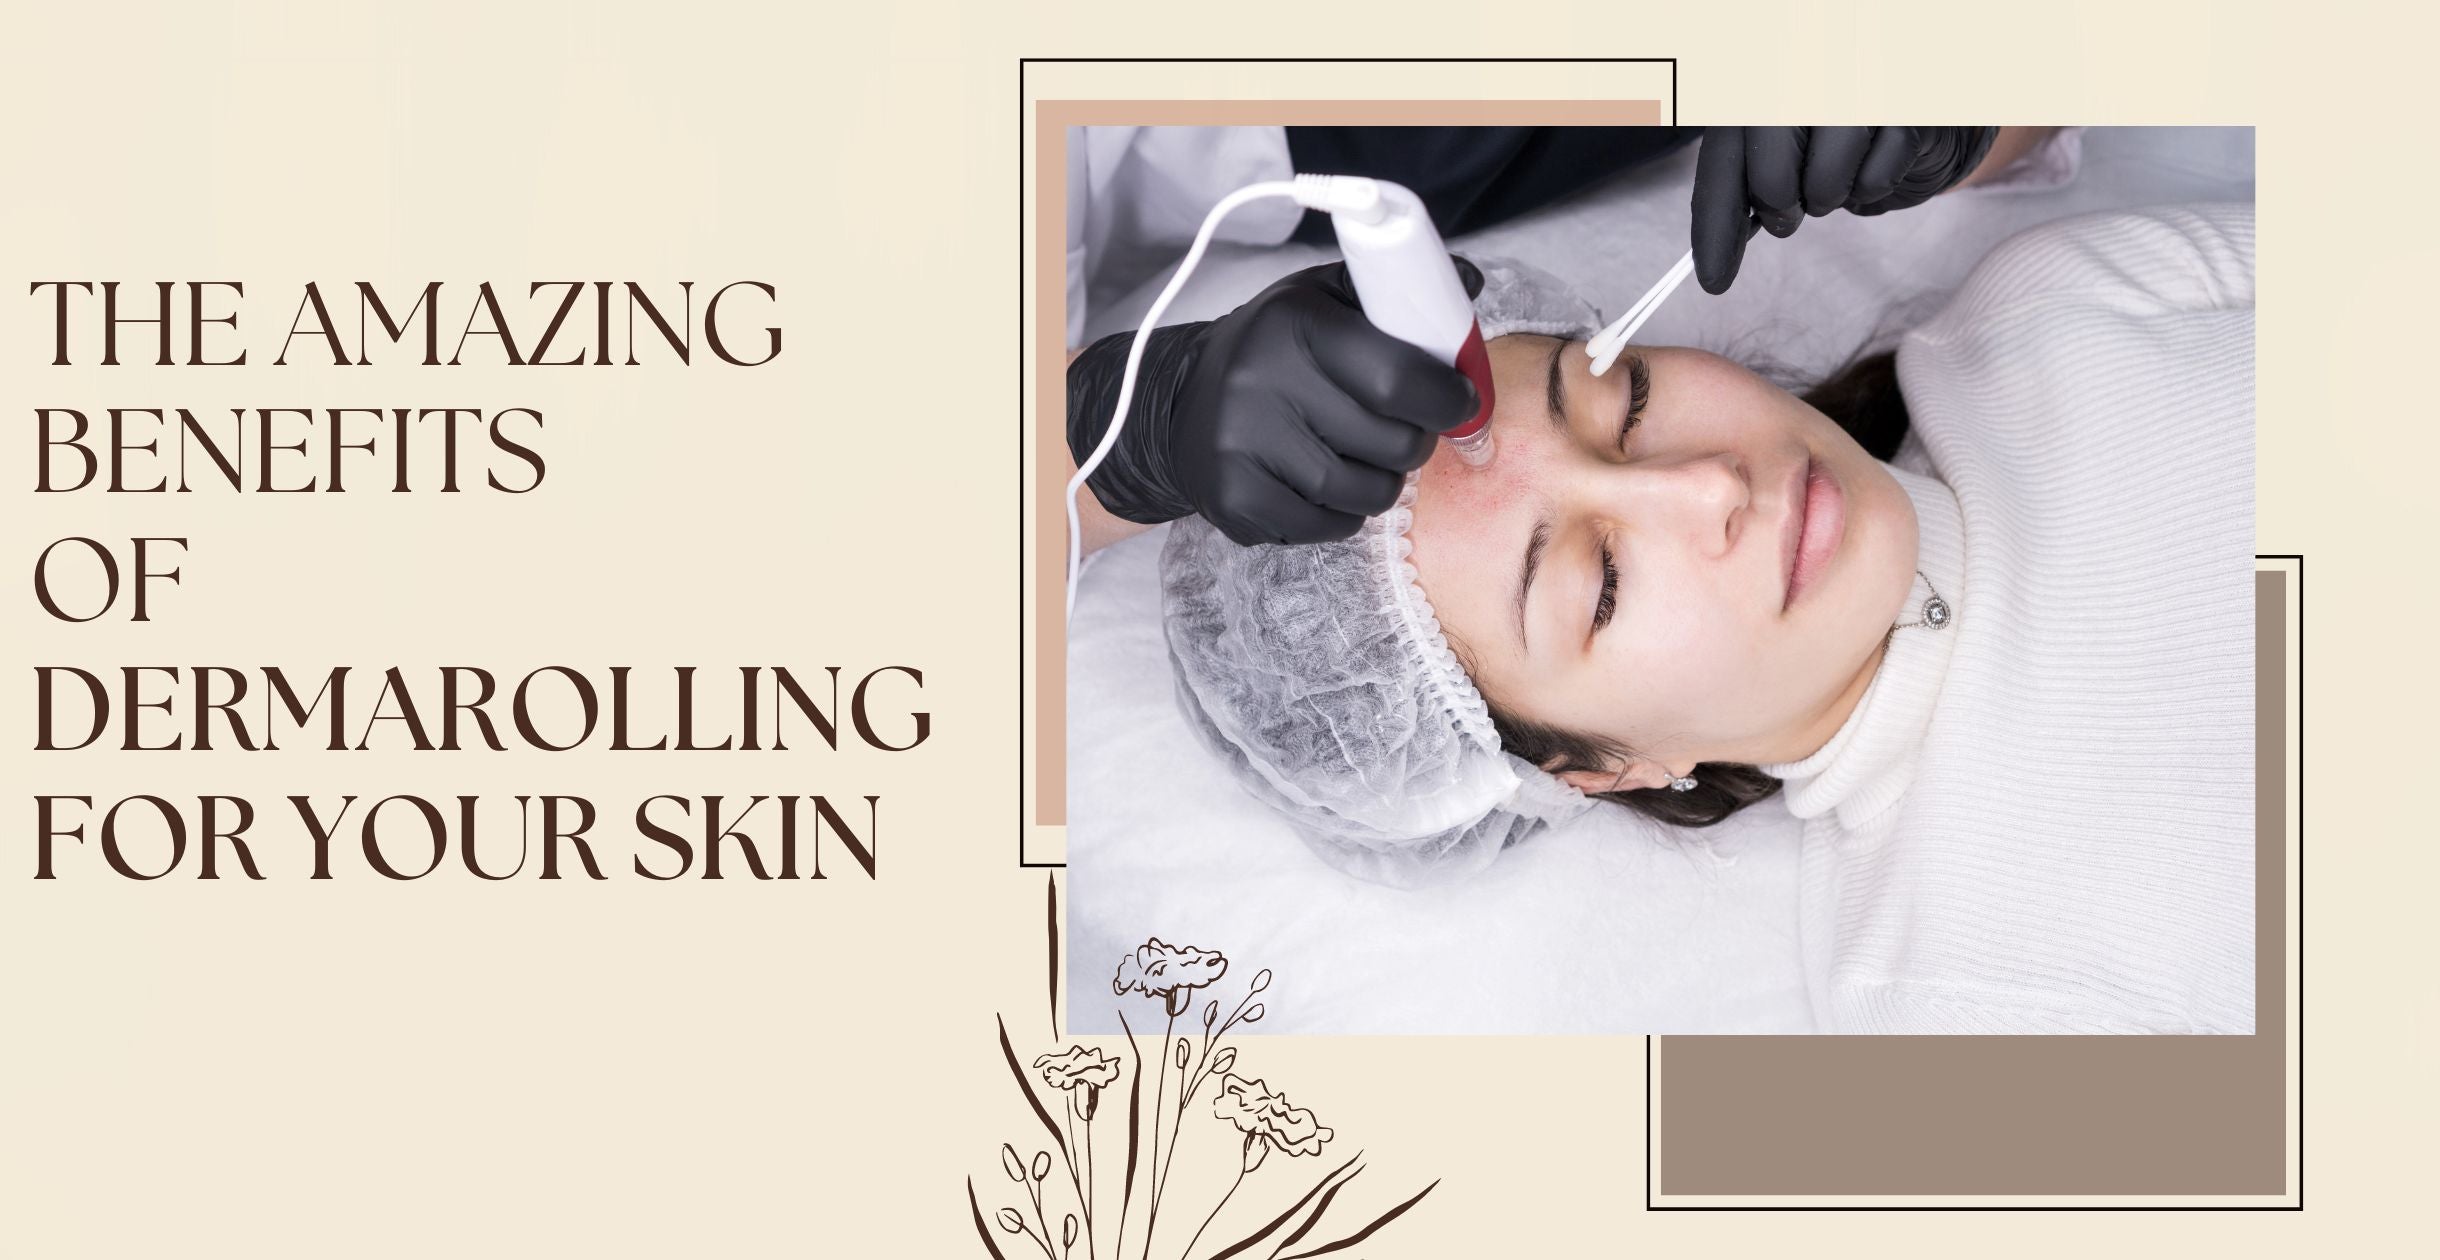 The Amazing Benefits of Dermarolling for Your Skin